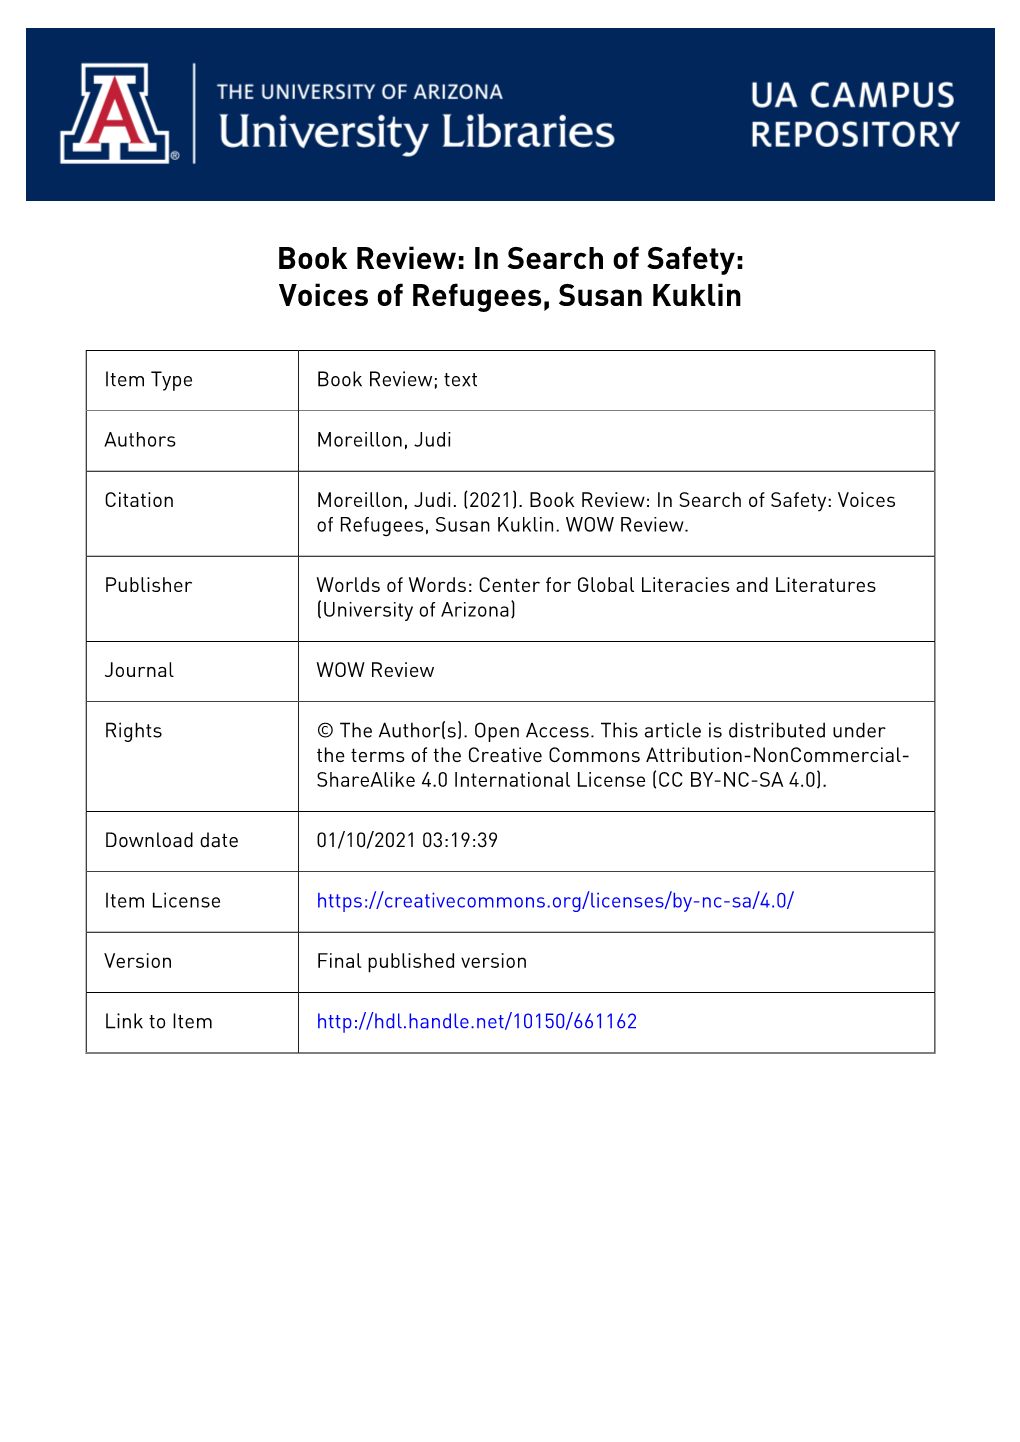 WOW Review: Volume XIII, Issue 1 Fall 2020 in Search of Safety